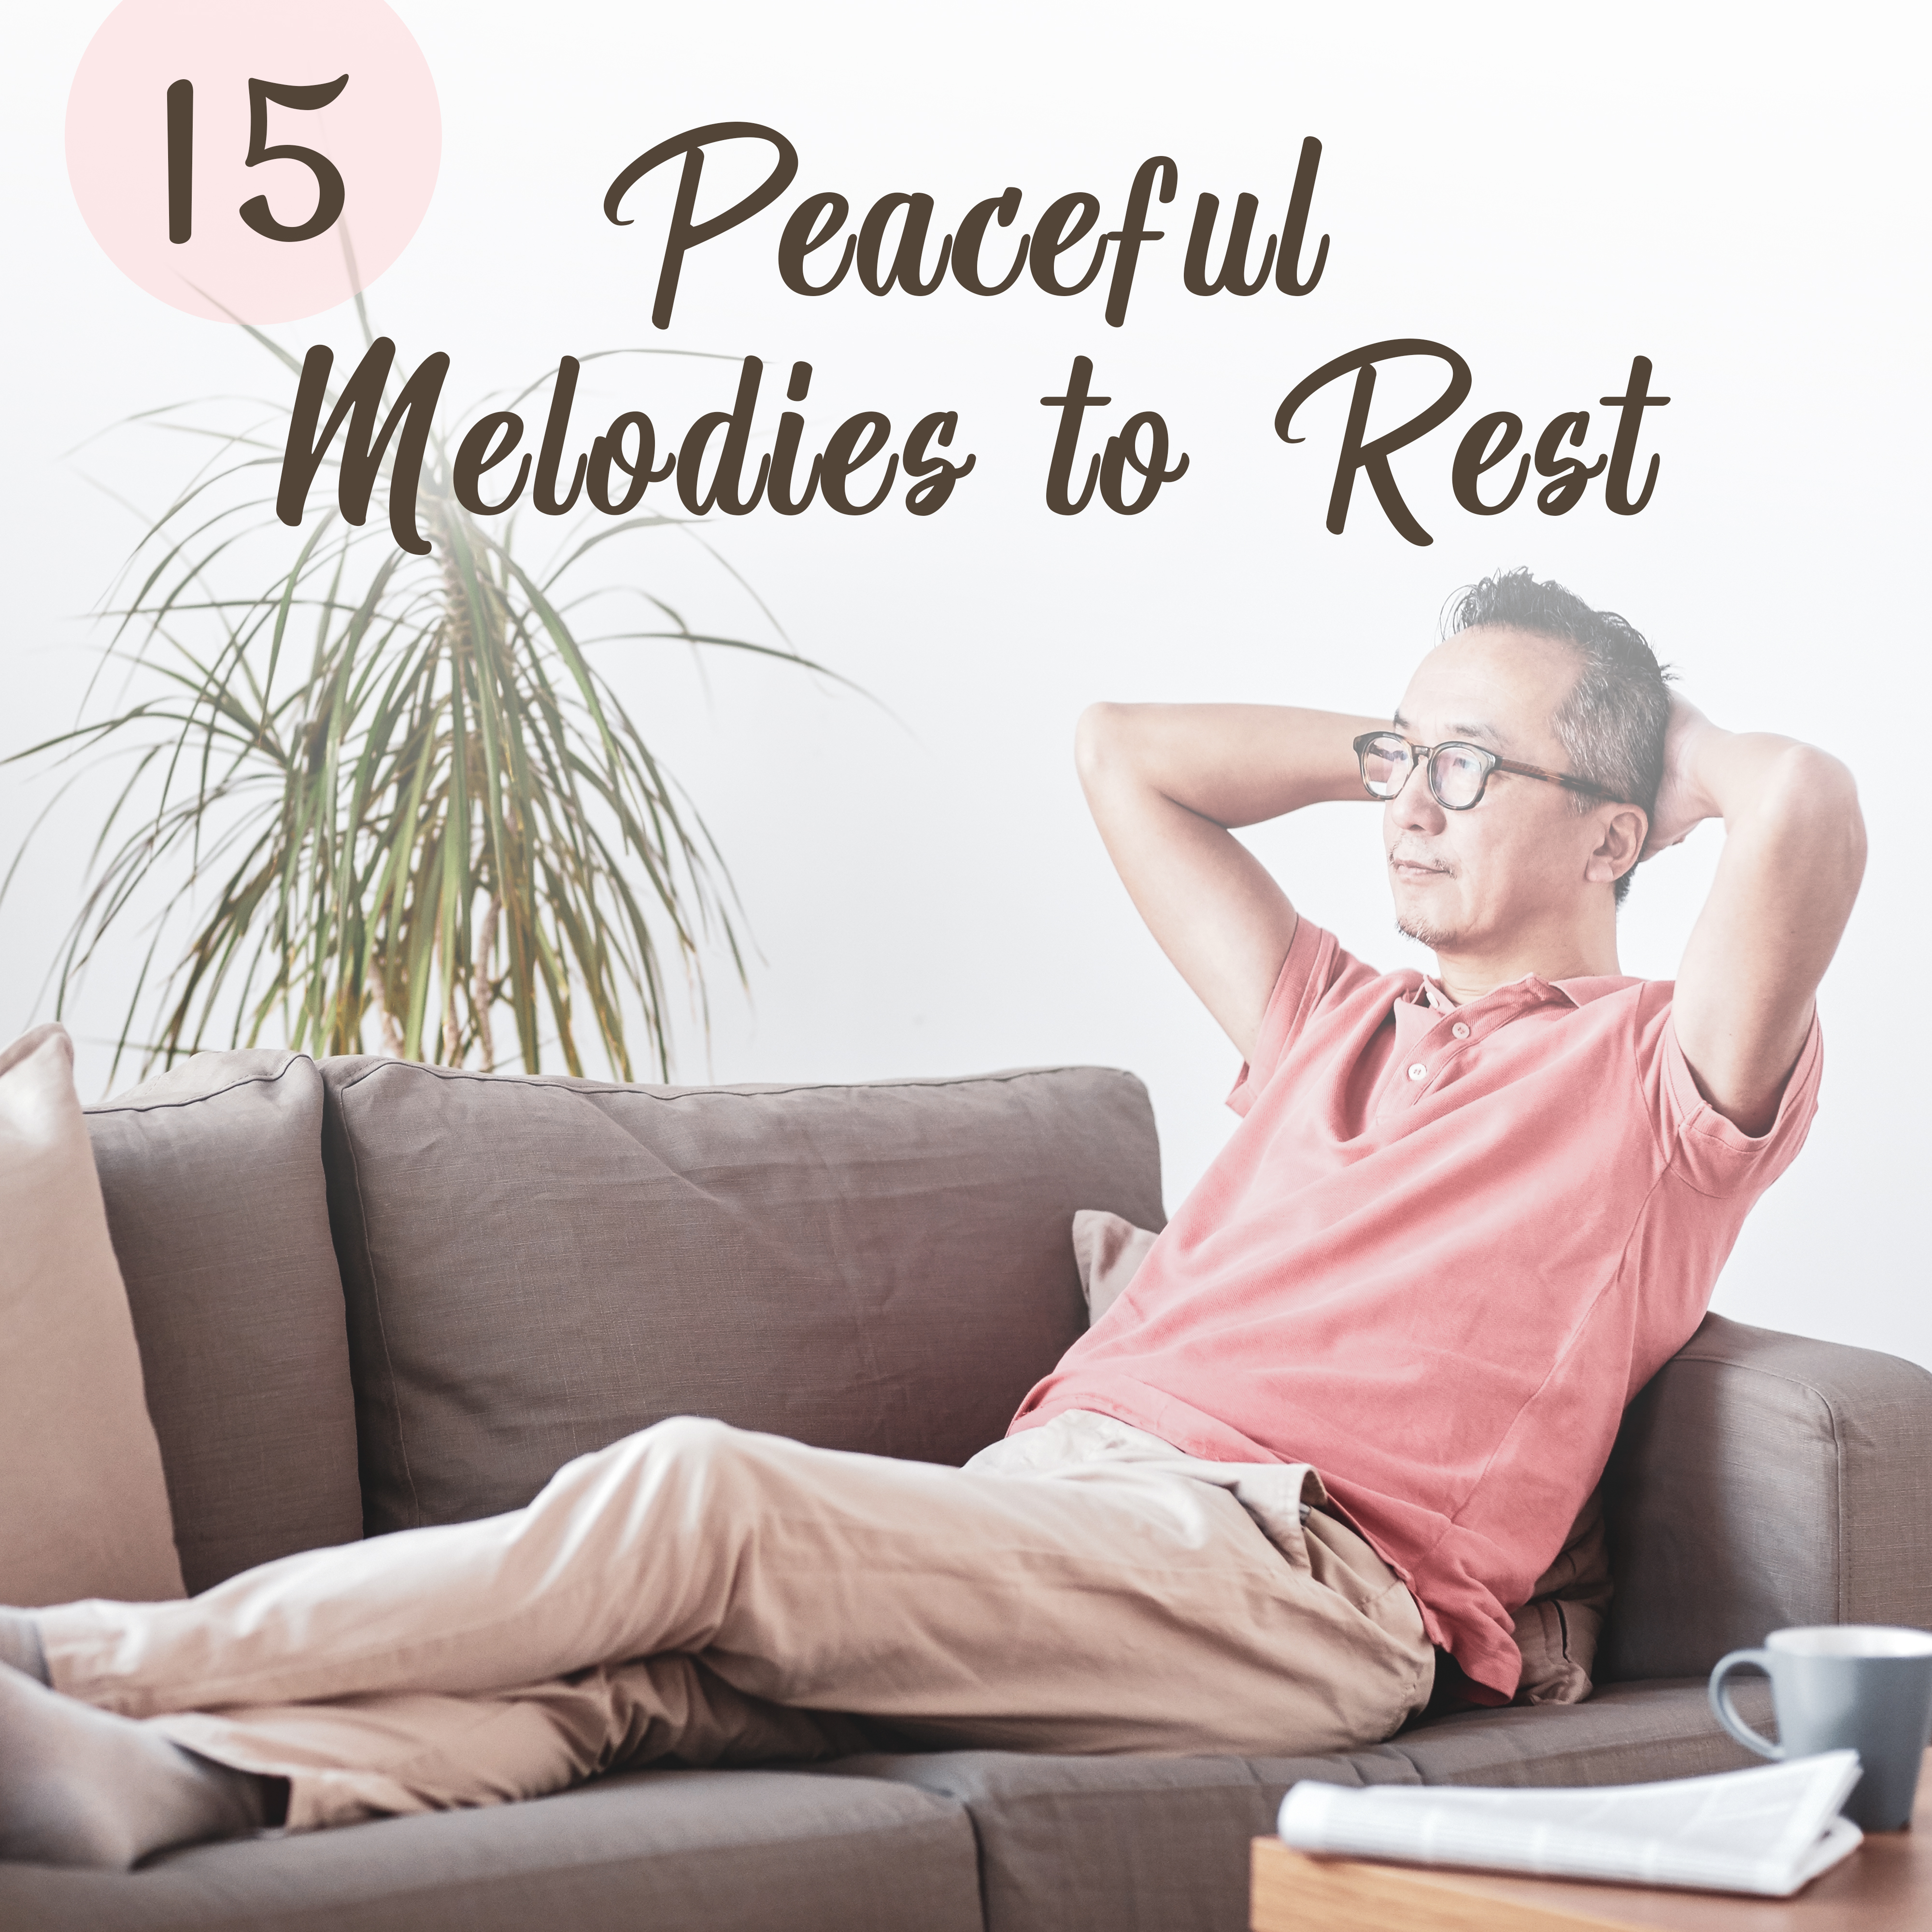 15 Peaceful Melodies to Rest